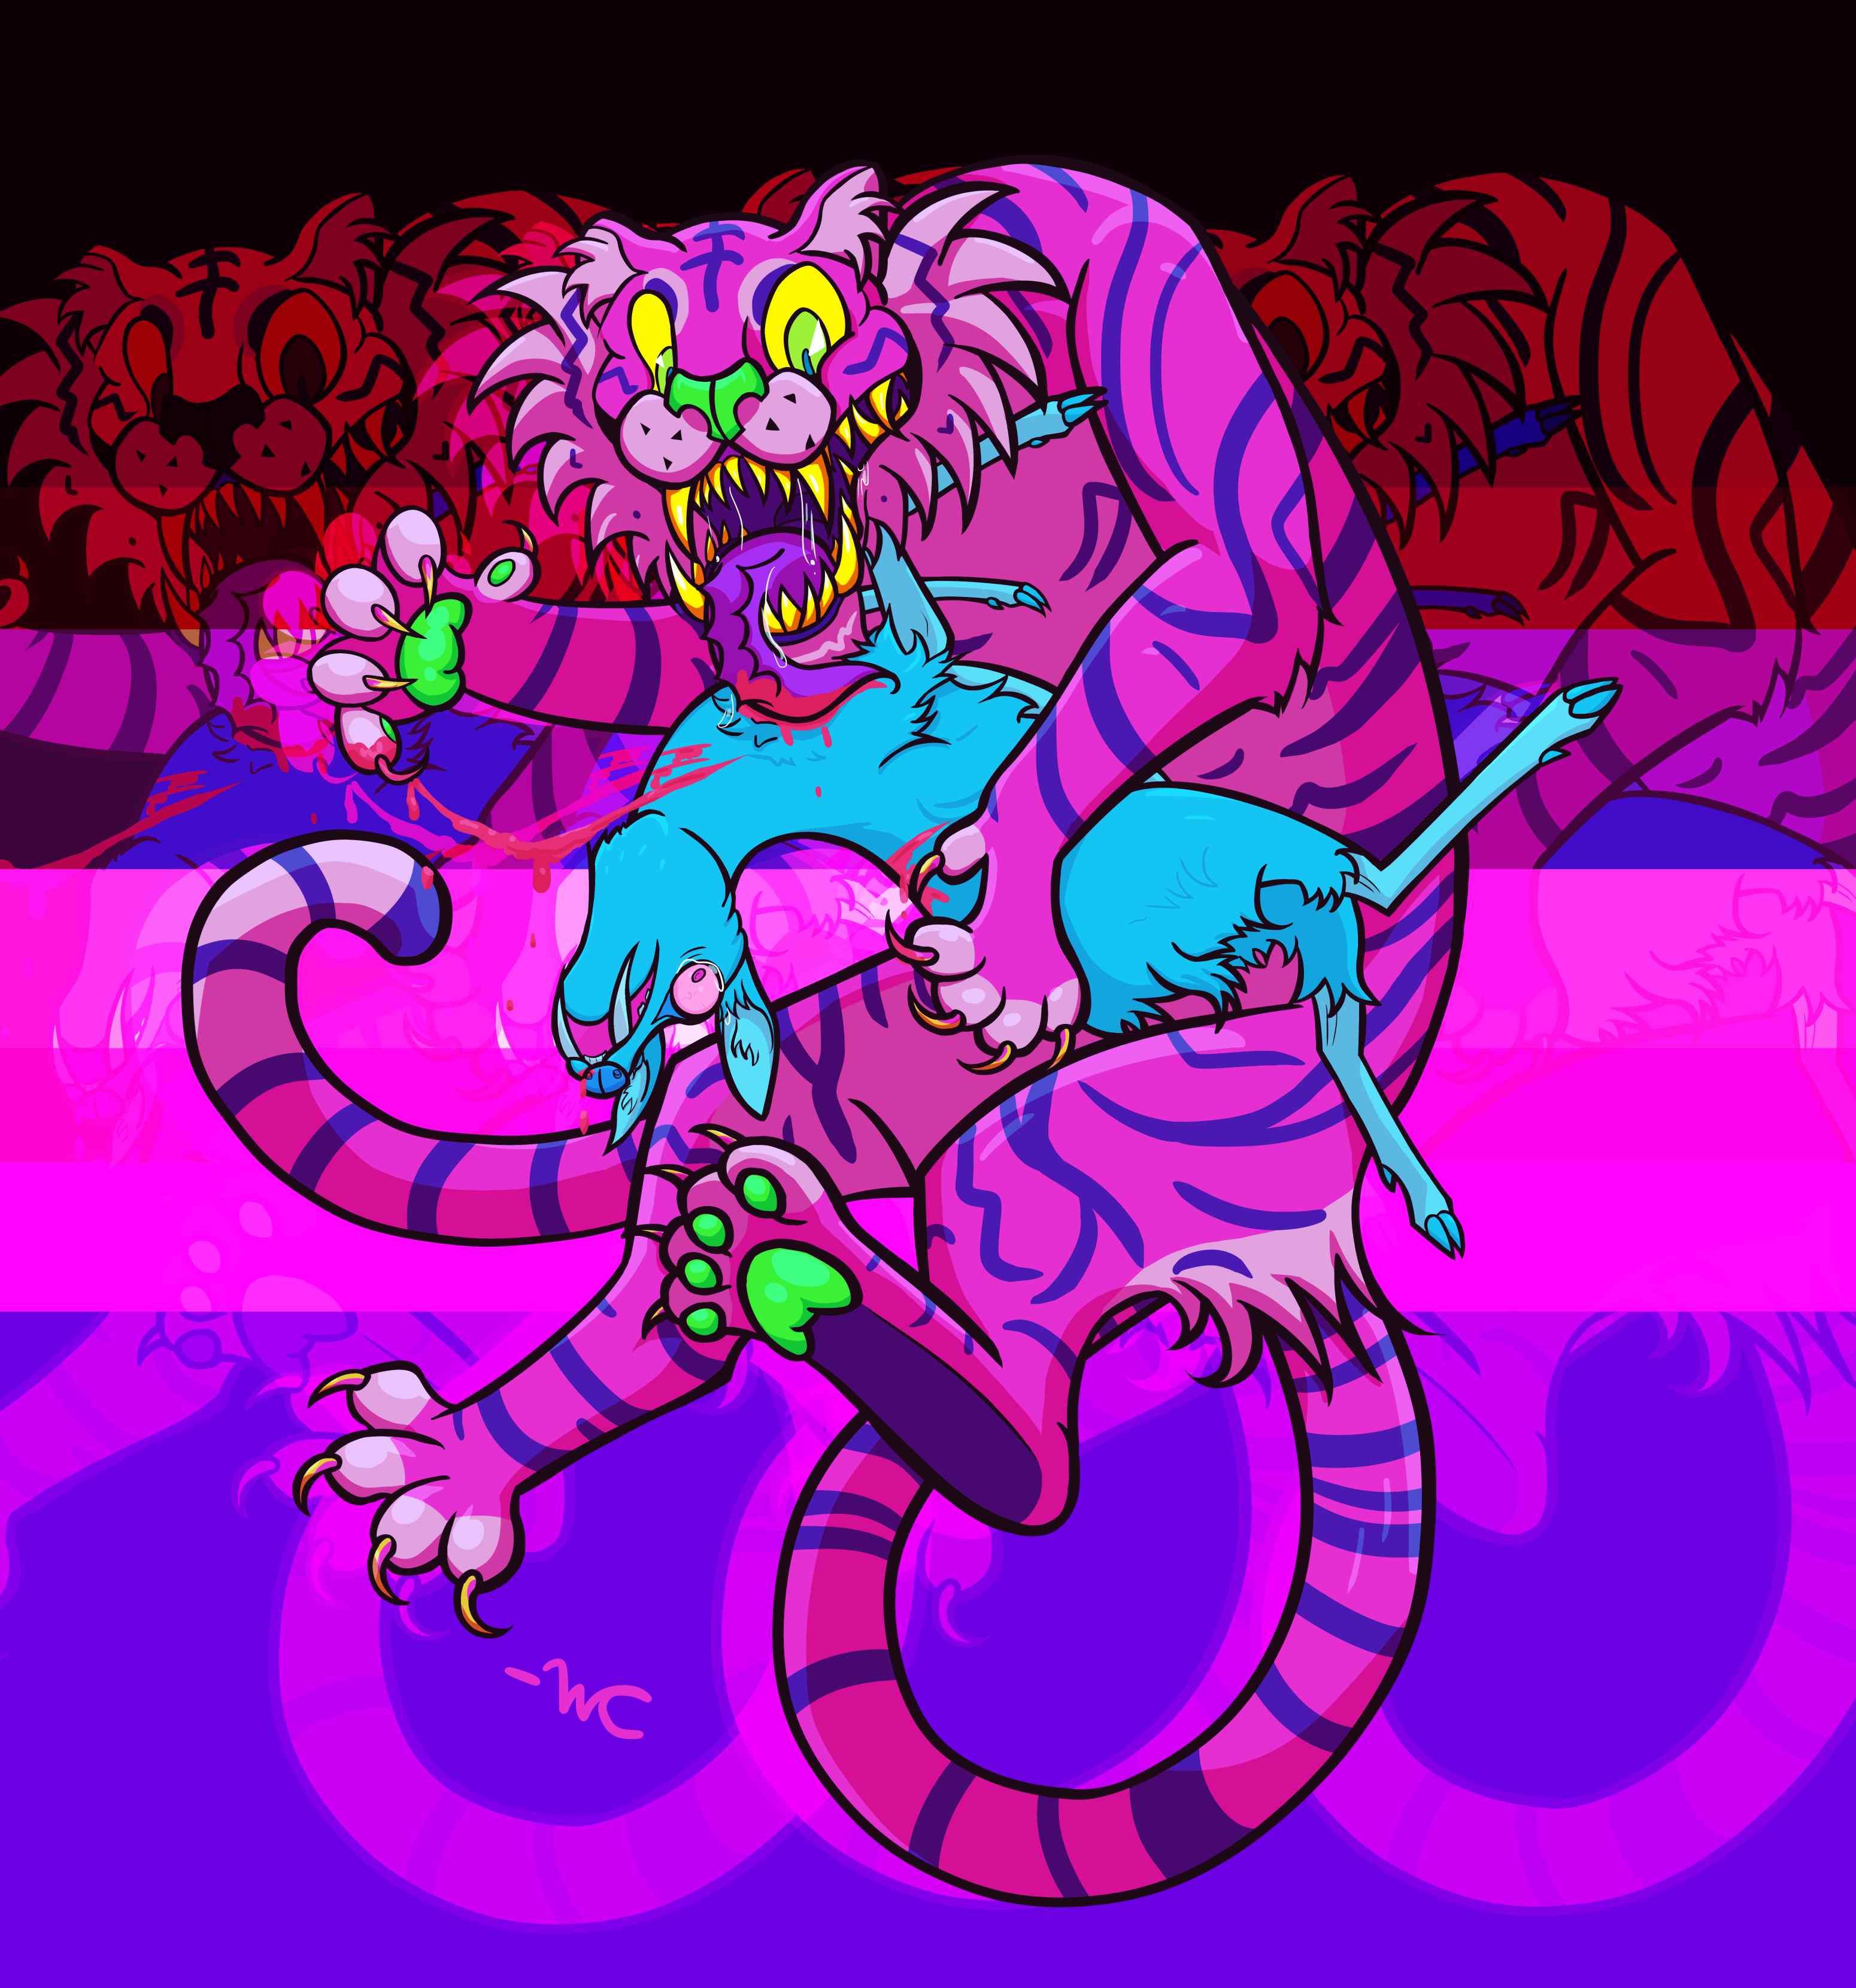 A brightly-coloured cartoon drawing of a tiger and a musk deer. The tiger is pink and purple, and is holding onto the frightened musk deer with its claws, licking it and causing it to bleed. The musk deer is bright blue.